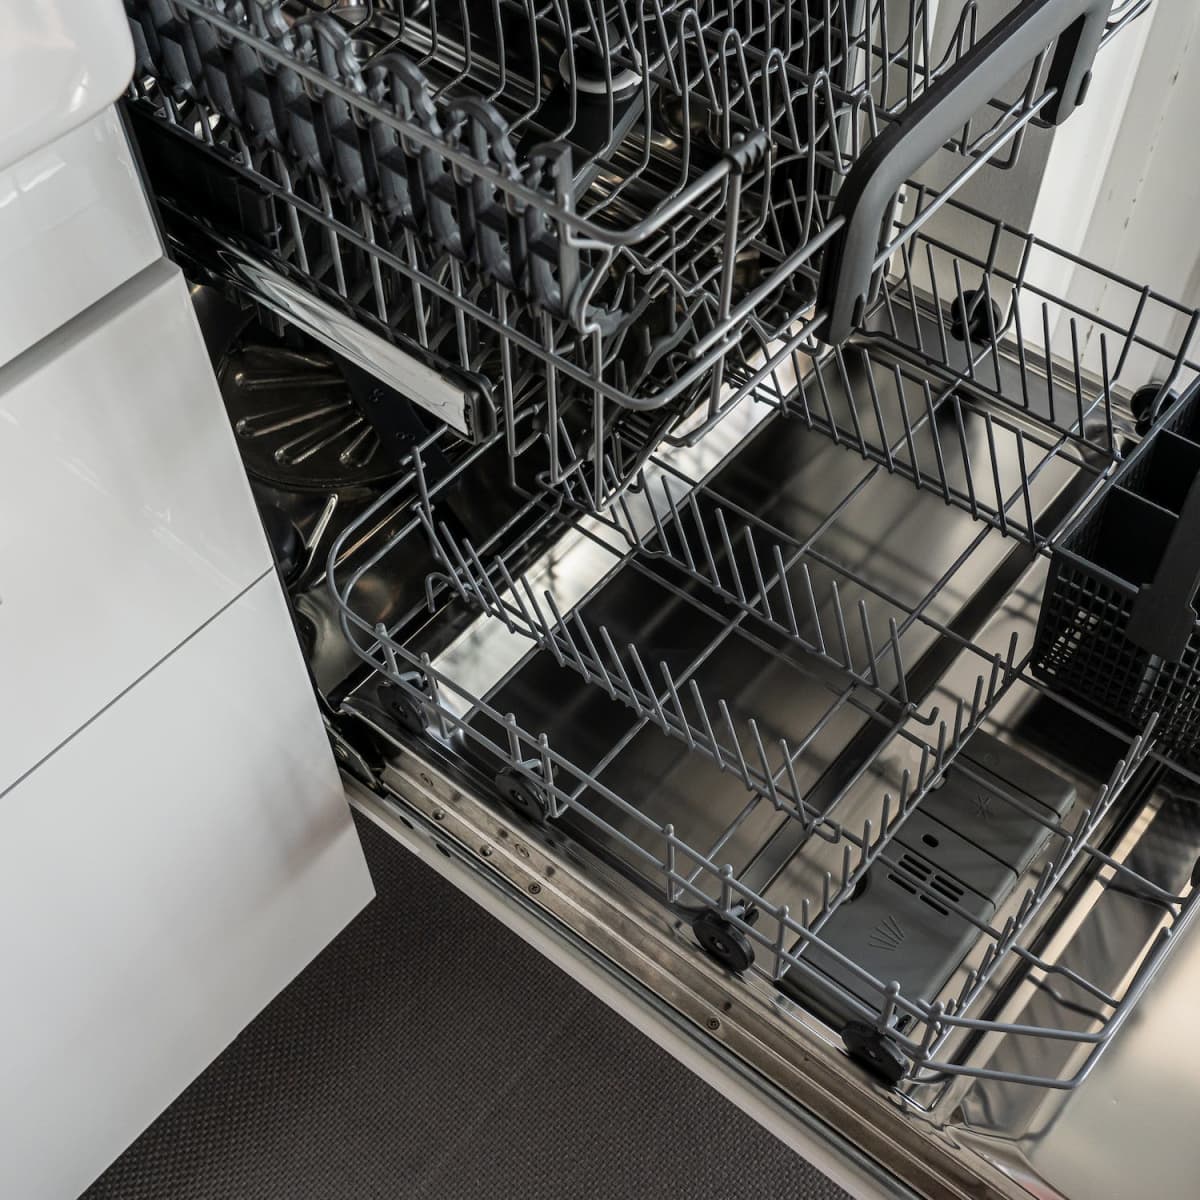 How to Fix a Rusty Dishwasher Rack for Less Than $10